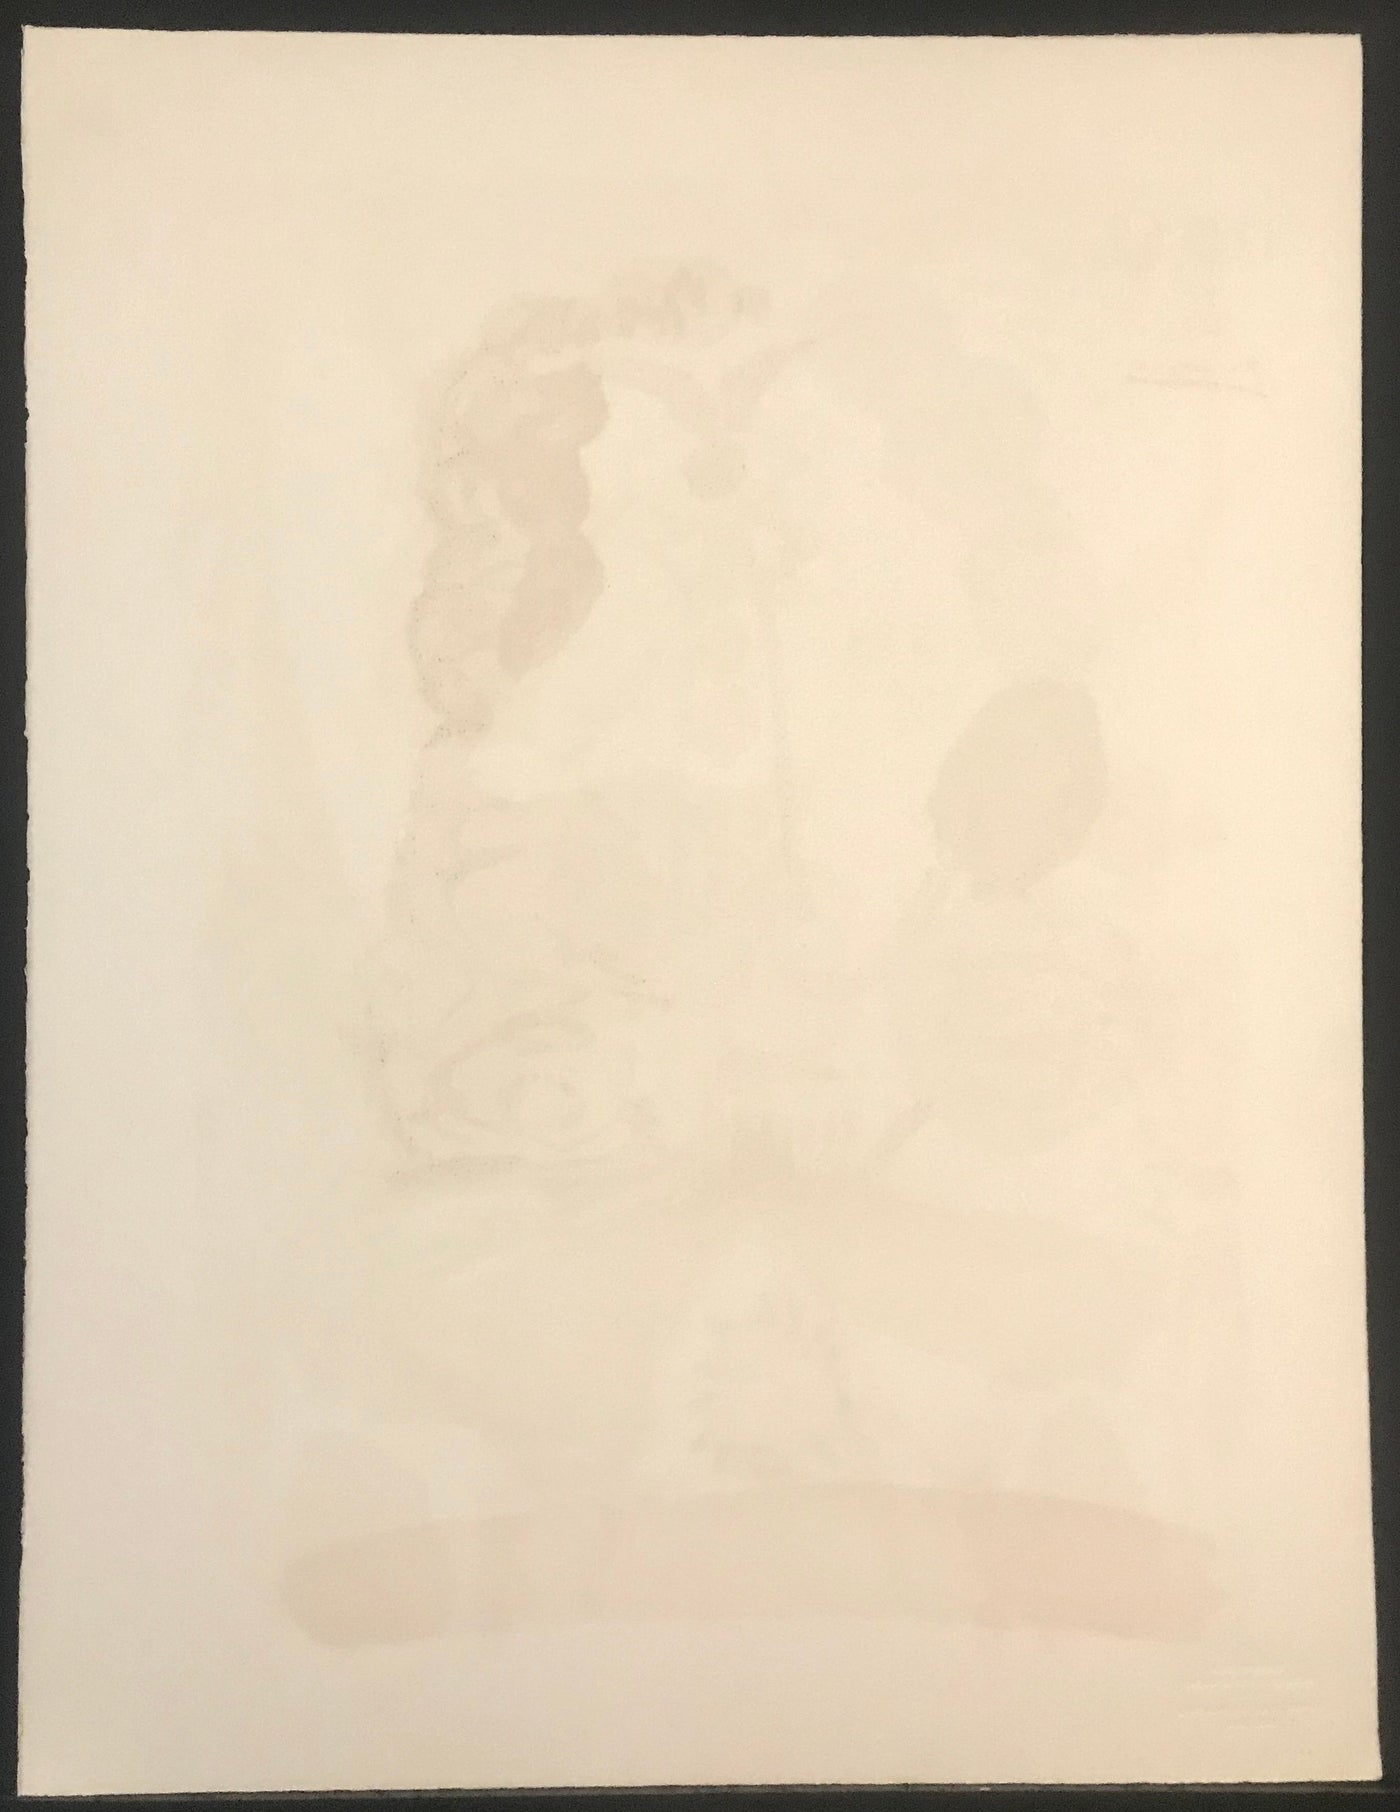 Pablo Picasso (after) Portraits Imaginaires (Printed by Marcel Salinas. "A" Edition published by Harry N. Abrams, In"F" Edition published by Editions Cercle d'Art, Paris) 1969